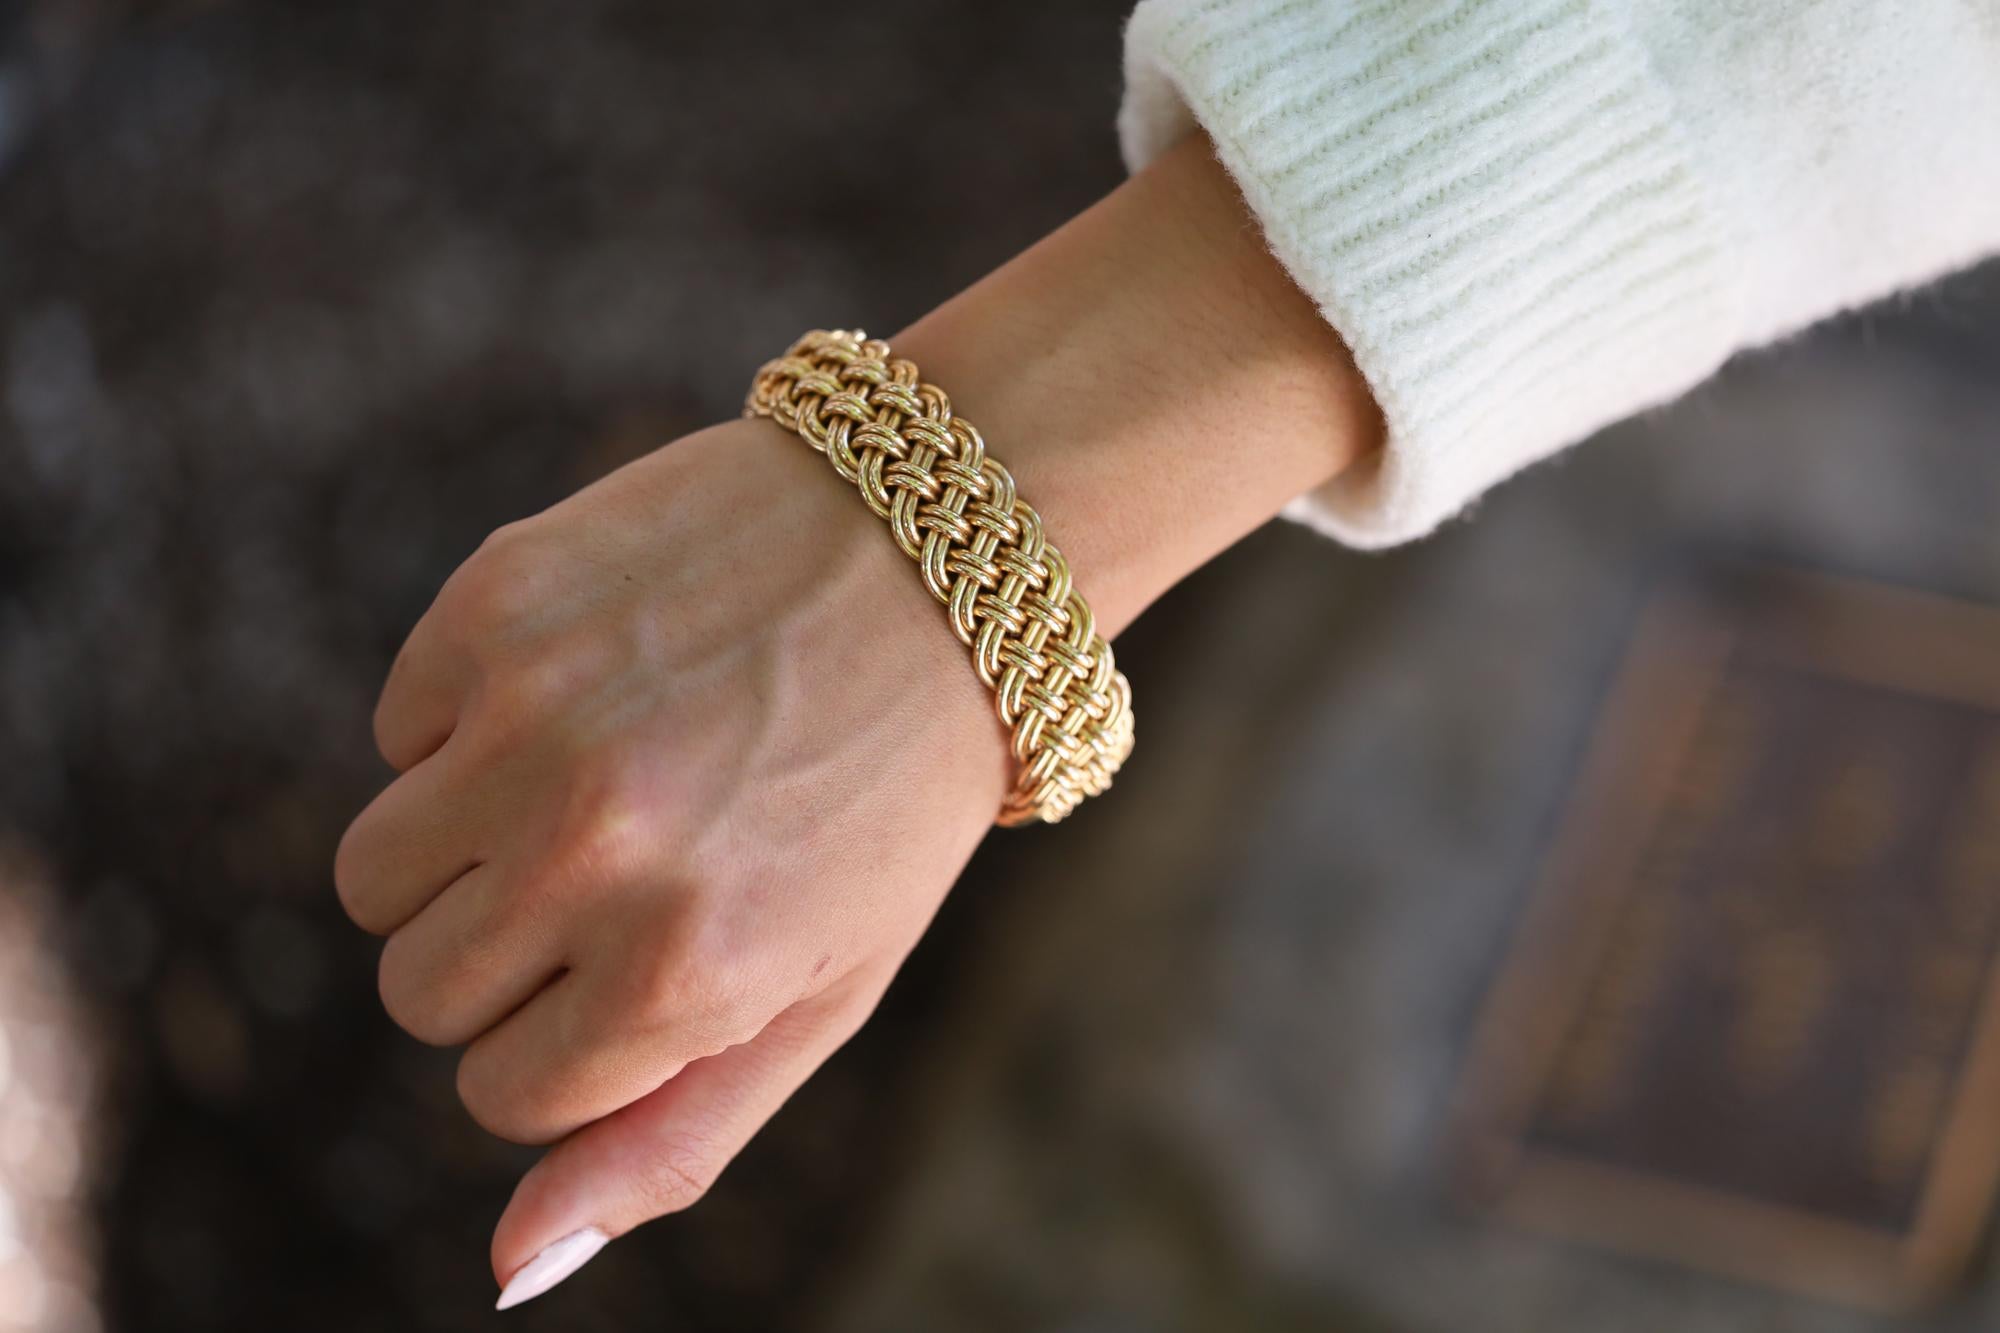 This unique and bespoke cuff bracelet is a substantial estate heirloom weighing over 2 ounces. The high luster bangle was hand woven from only 2 strands of 14k yellow gold, laced in a lovely French braid. Versatile enough to wear in a stack or